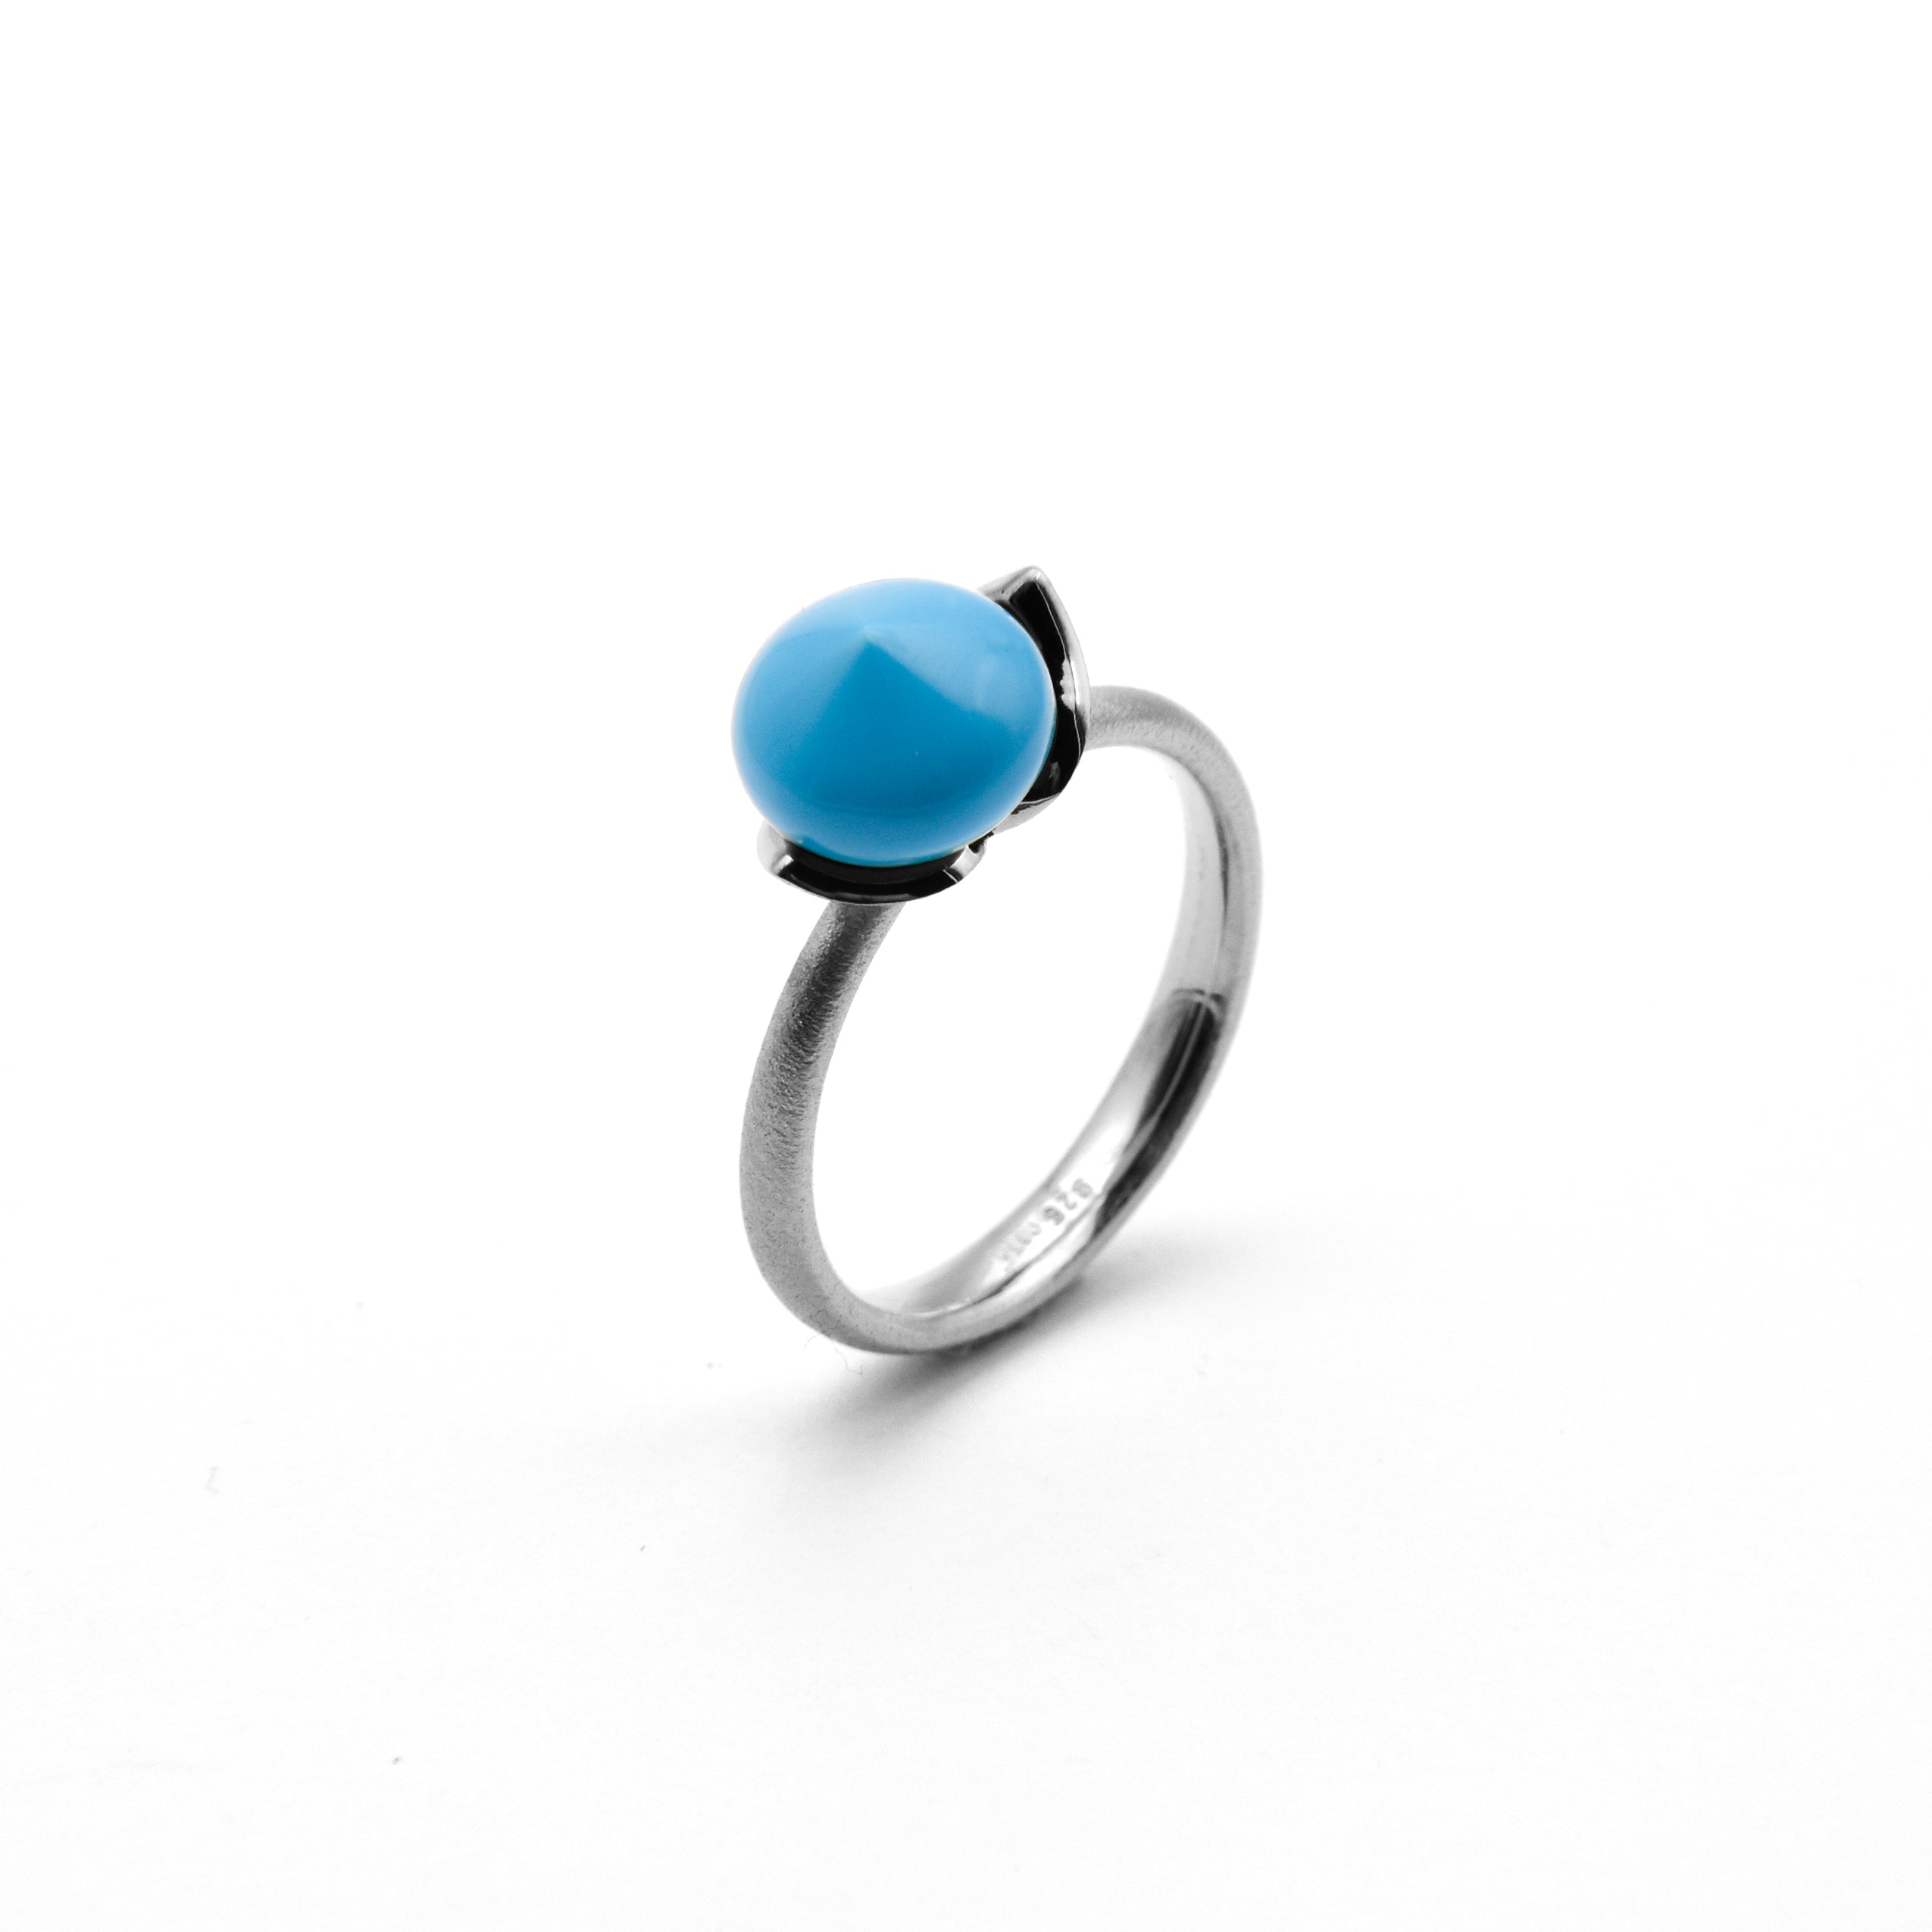 Dolce ring "smal" with turquoise rec. 925/-